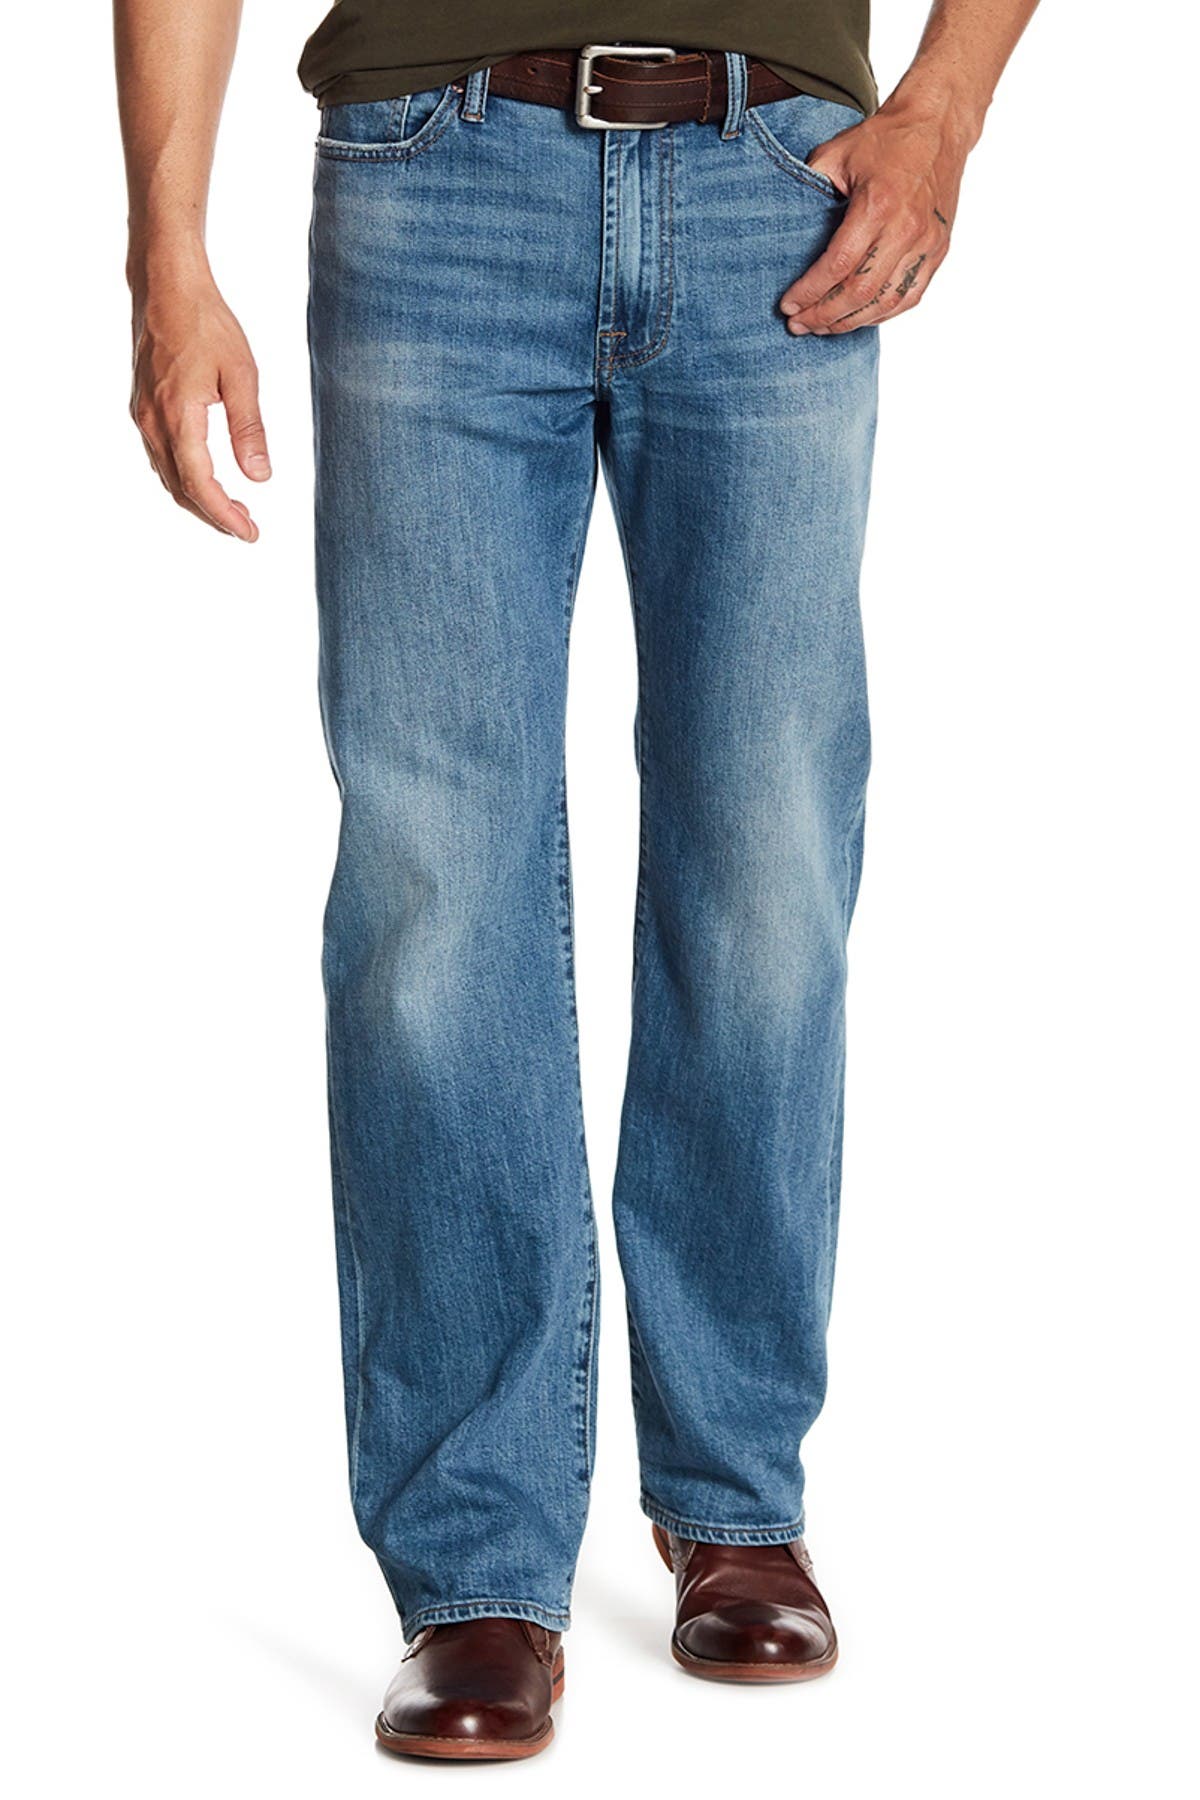 lucky brand jeans 181